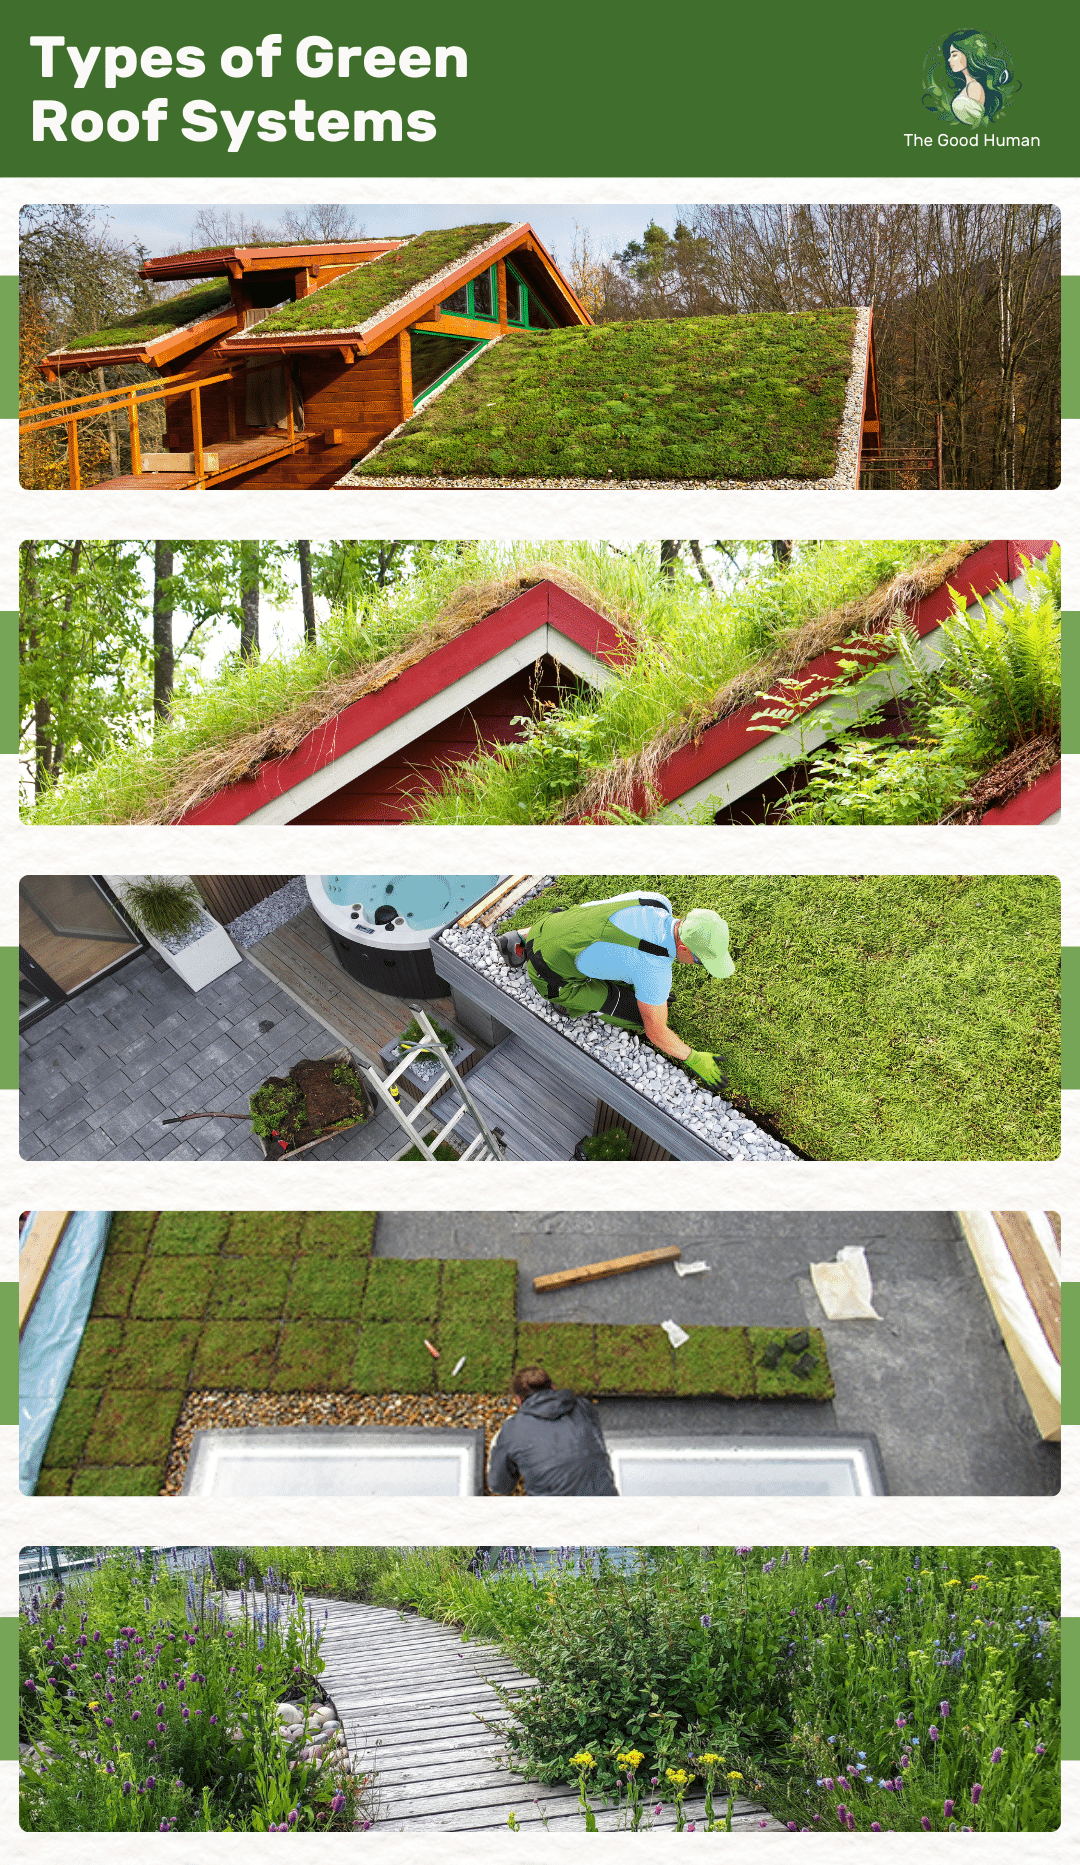 ferent types of green roof systems.